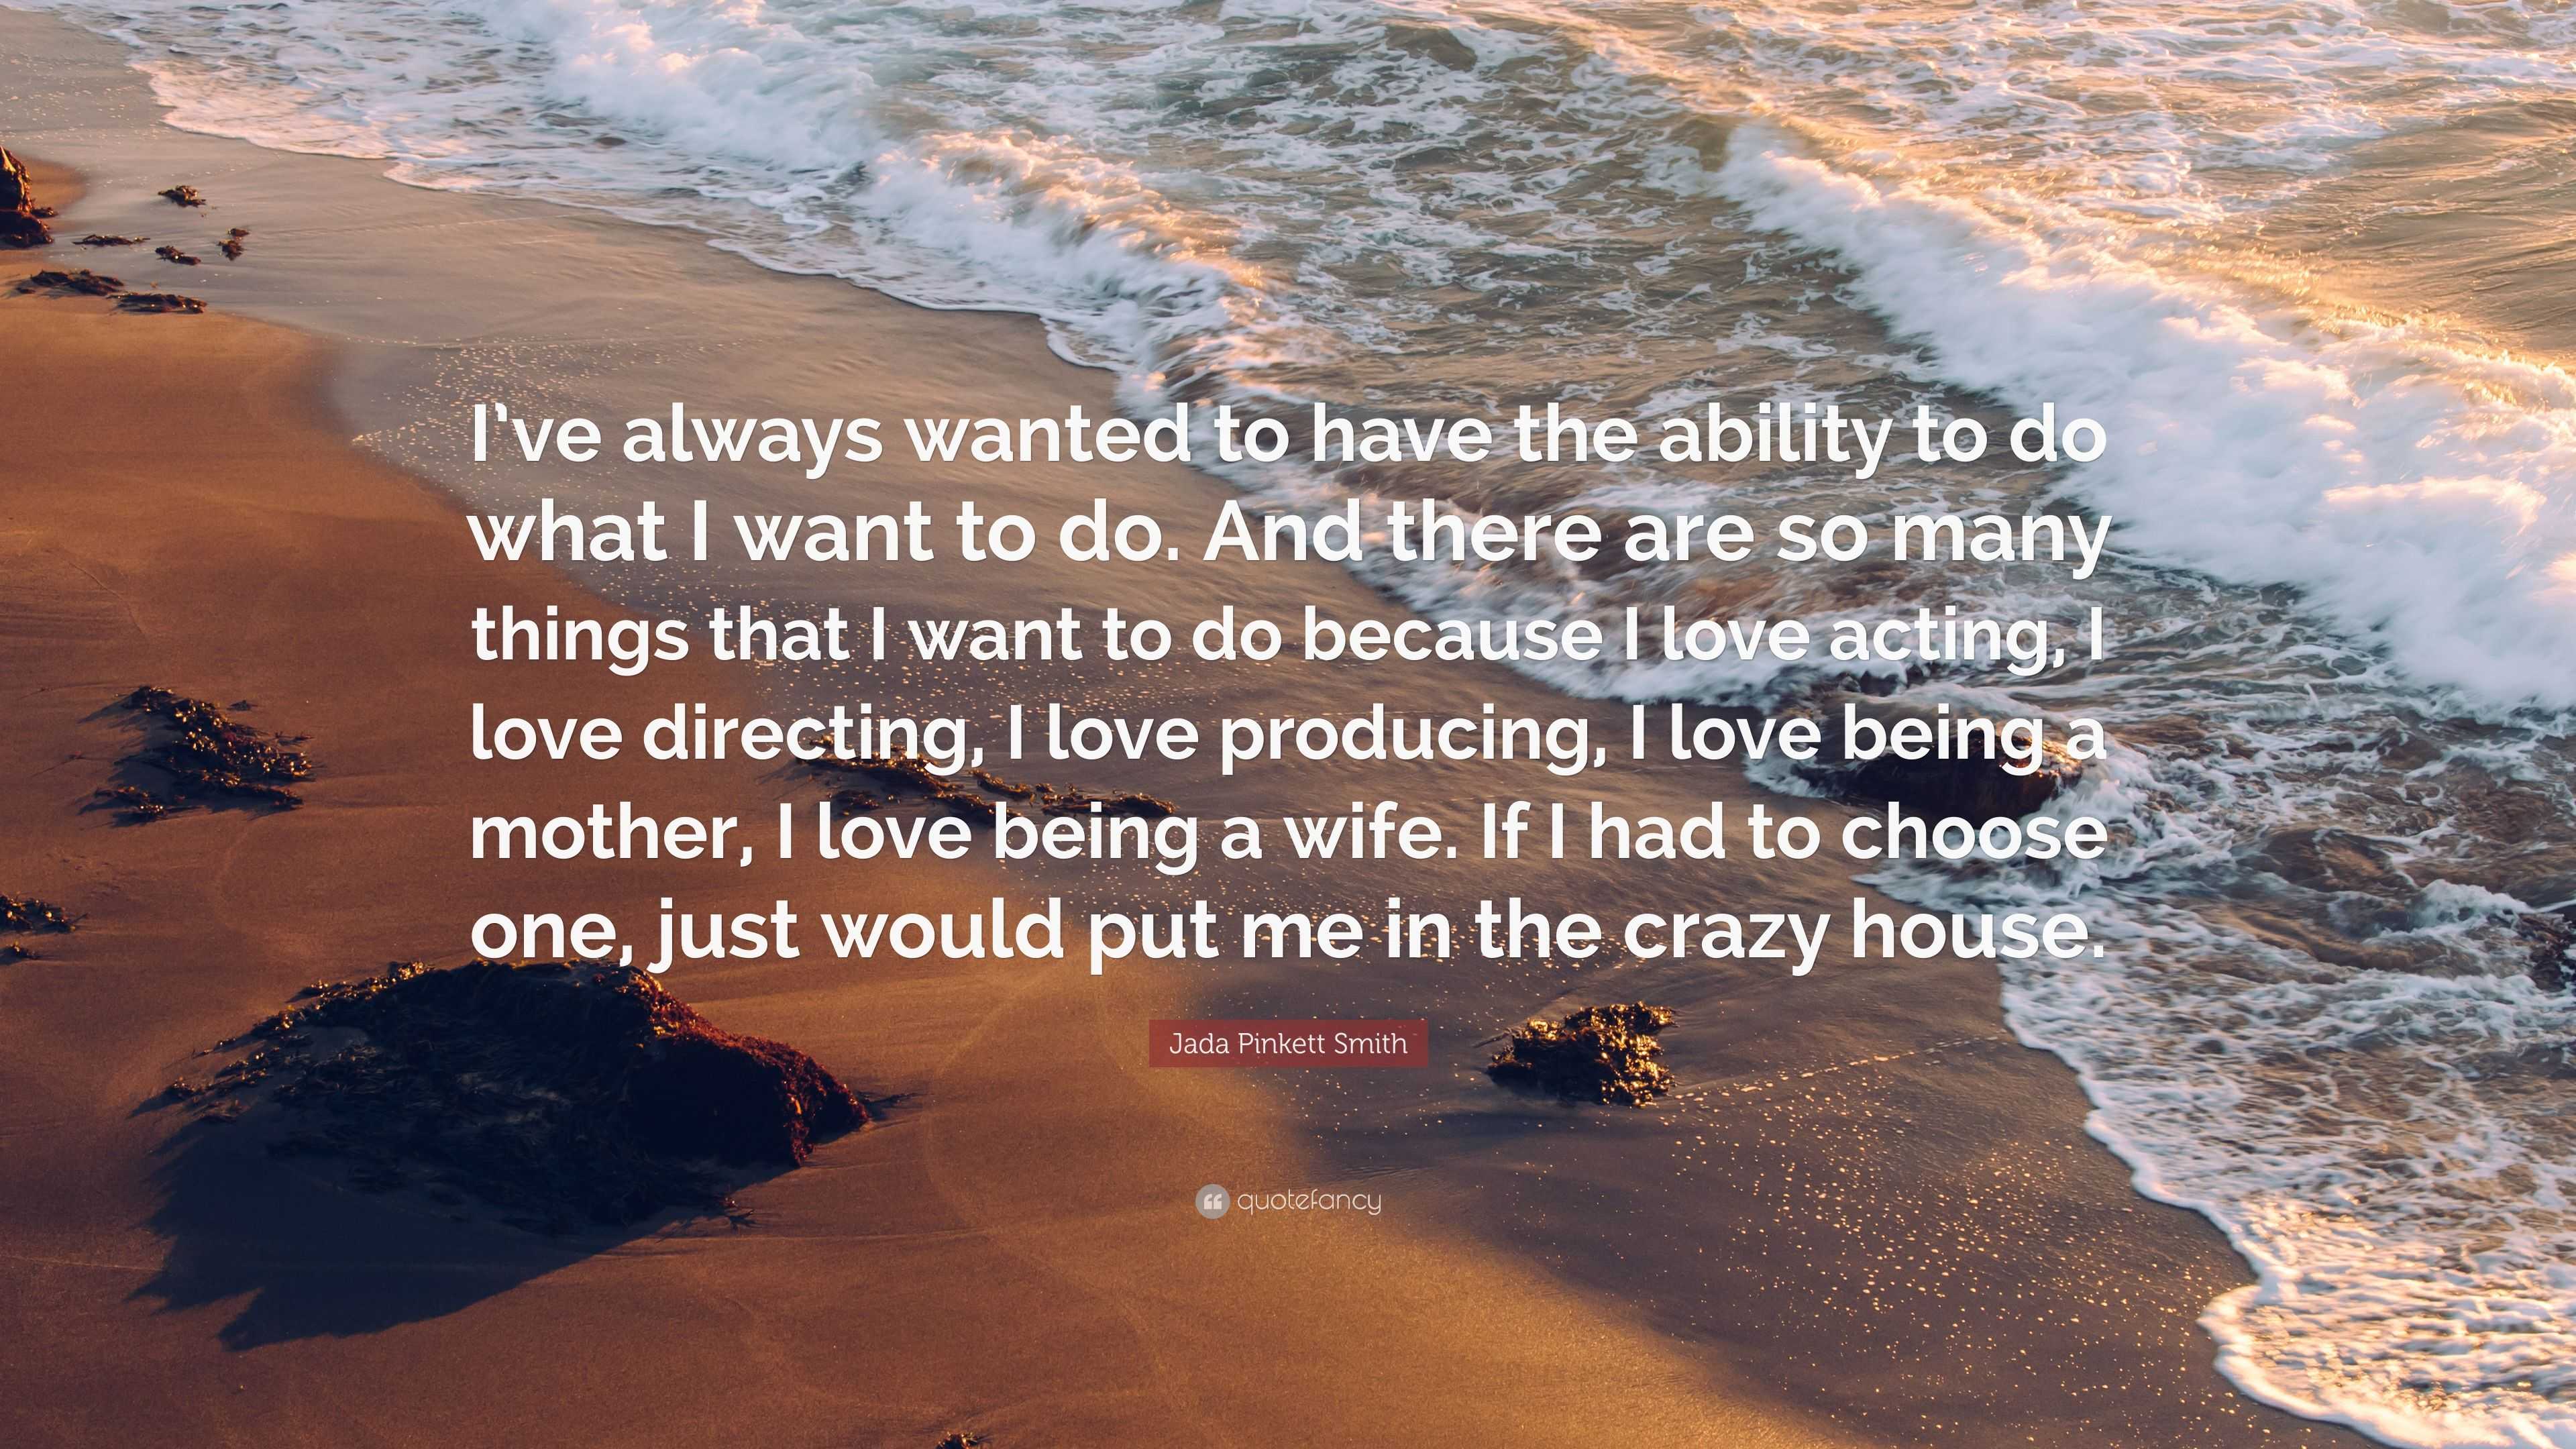 Jada Pinkett Smith Quote: “I’ve always wanted to have the ability to do ...